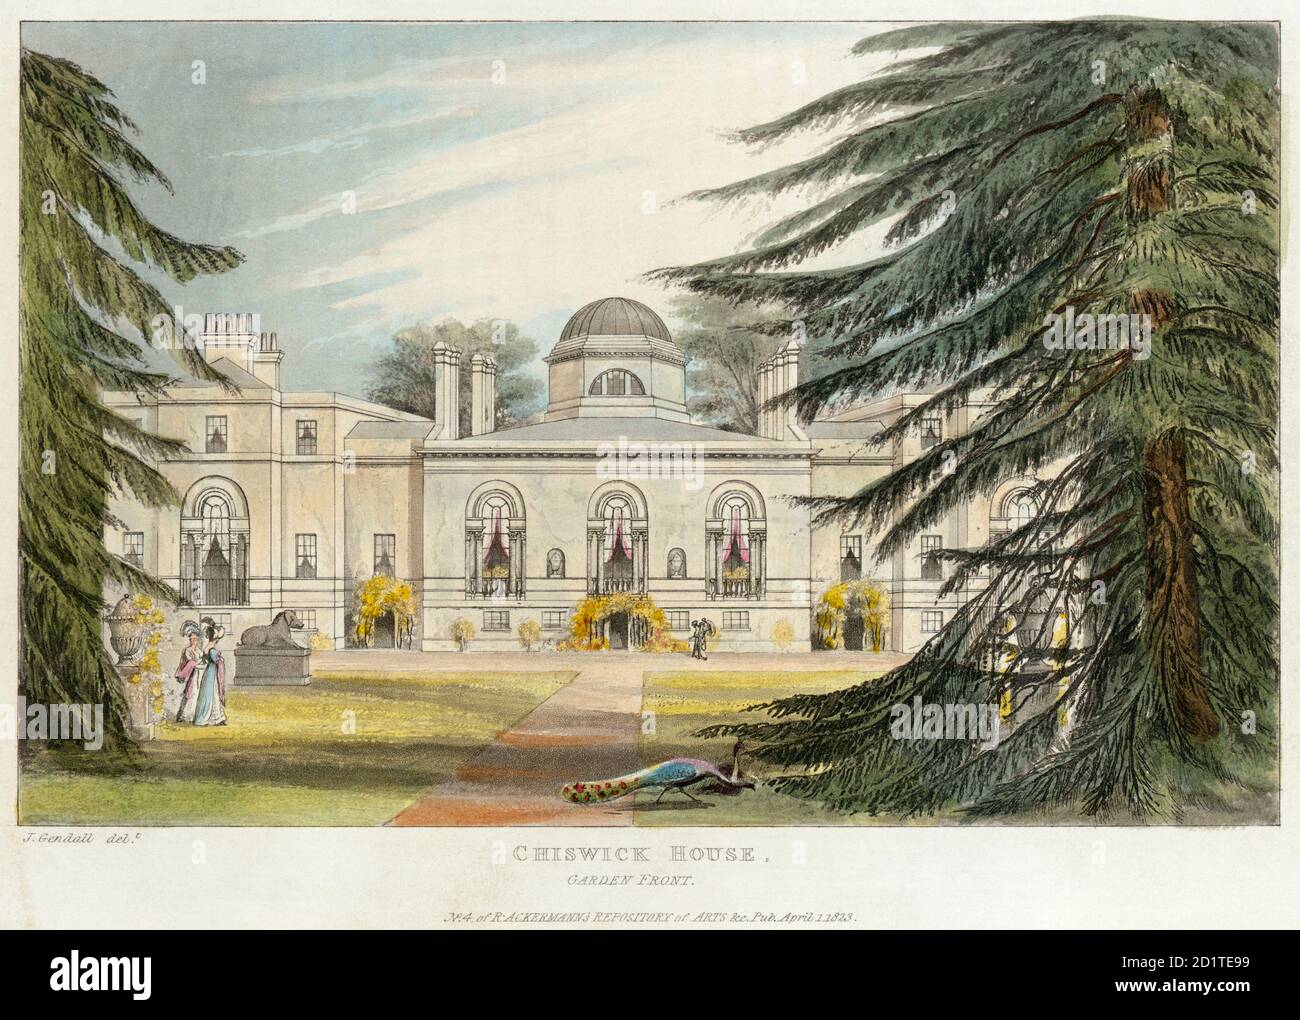 CHISWICK HOUSE, Burlington Lane, Hounslow, London. 'Garden front'. Aquatint colour engraving dated 1823. No.4 of Ackermann's Repository of Arts. MAYSON BEETON COLLECTION Stock Photo